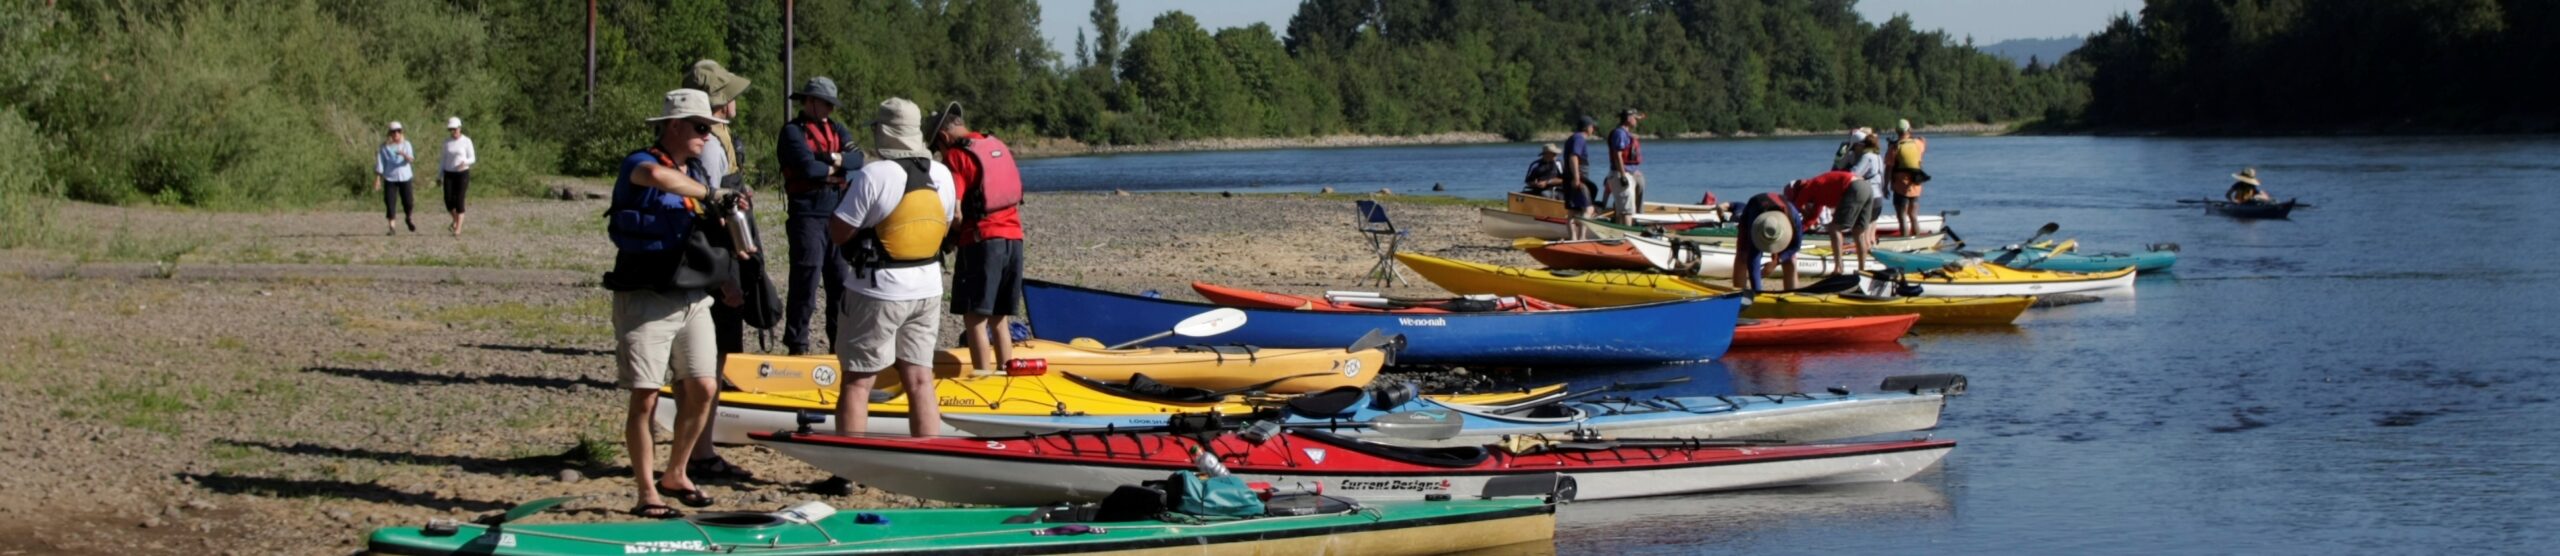 Kayak and canoe on the Willamette